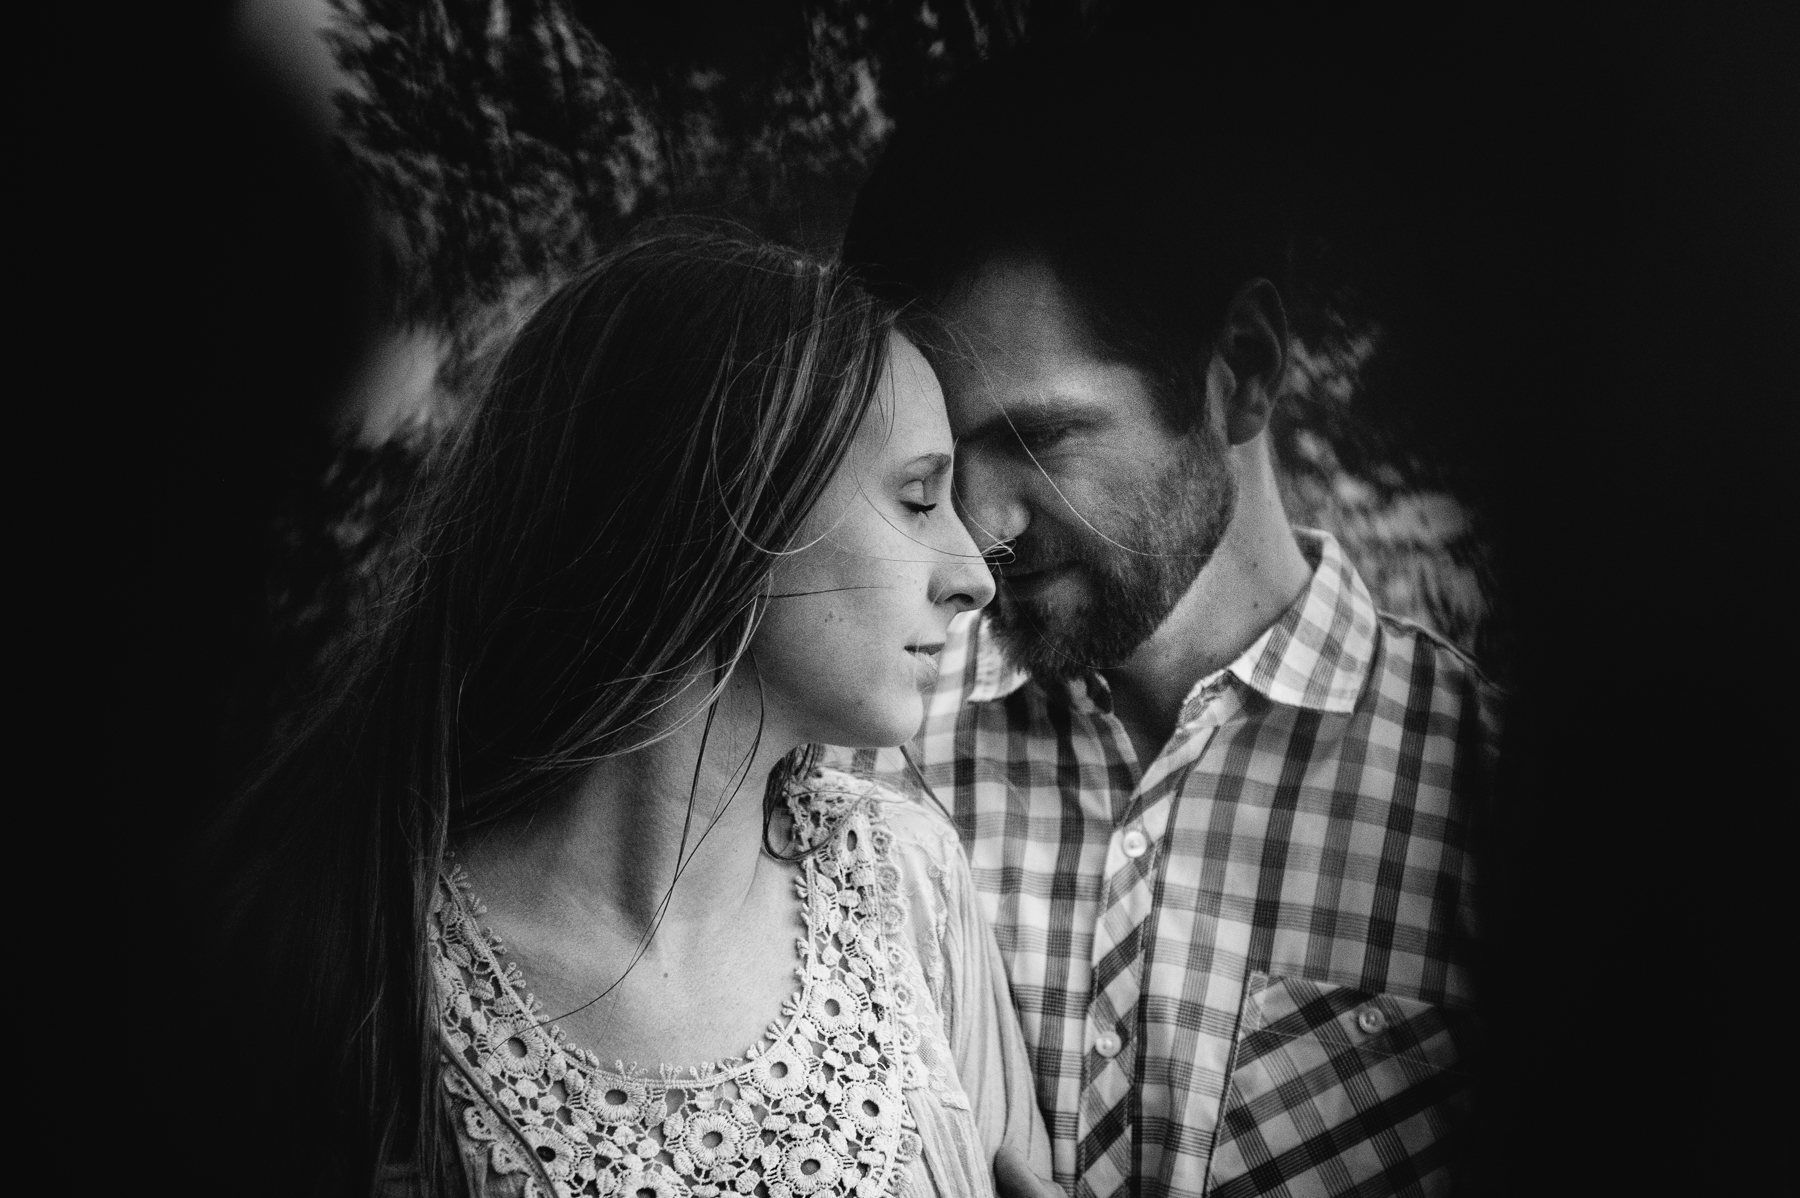 seattle-wedding-photographer-engagement-sessions-best-9